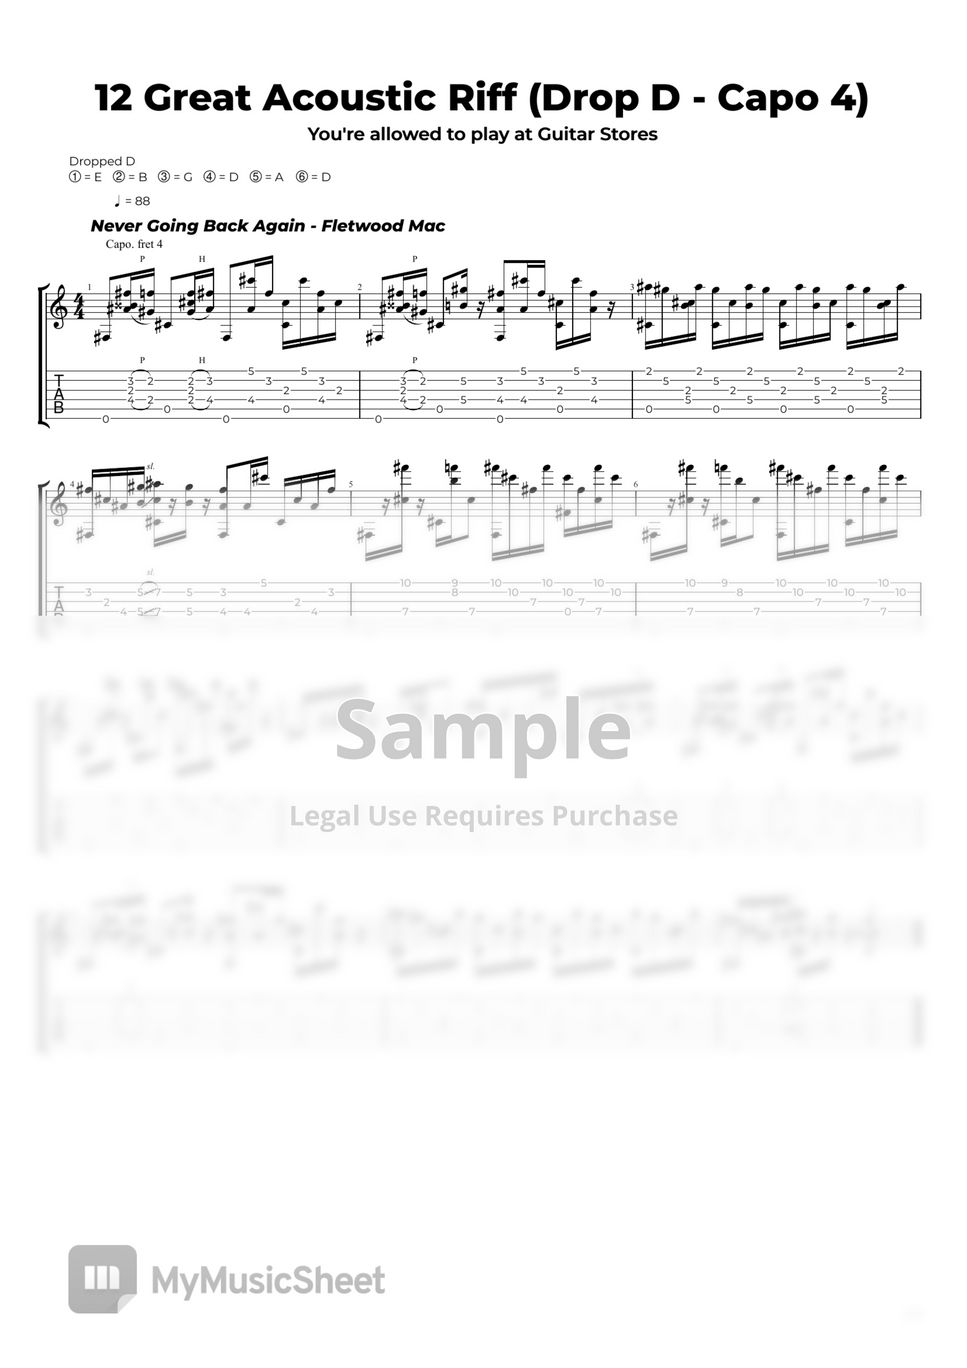 Multiple Artists - 12 Great Acoustic Riffs Sheets by Nikola Gugoski